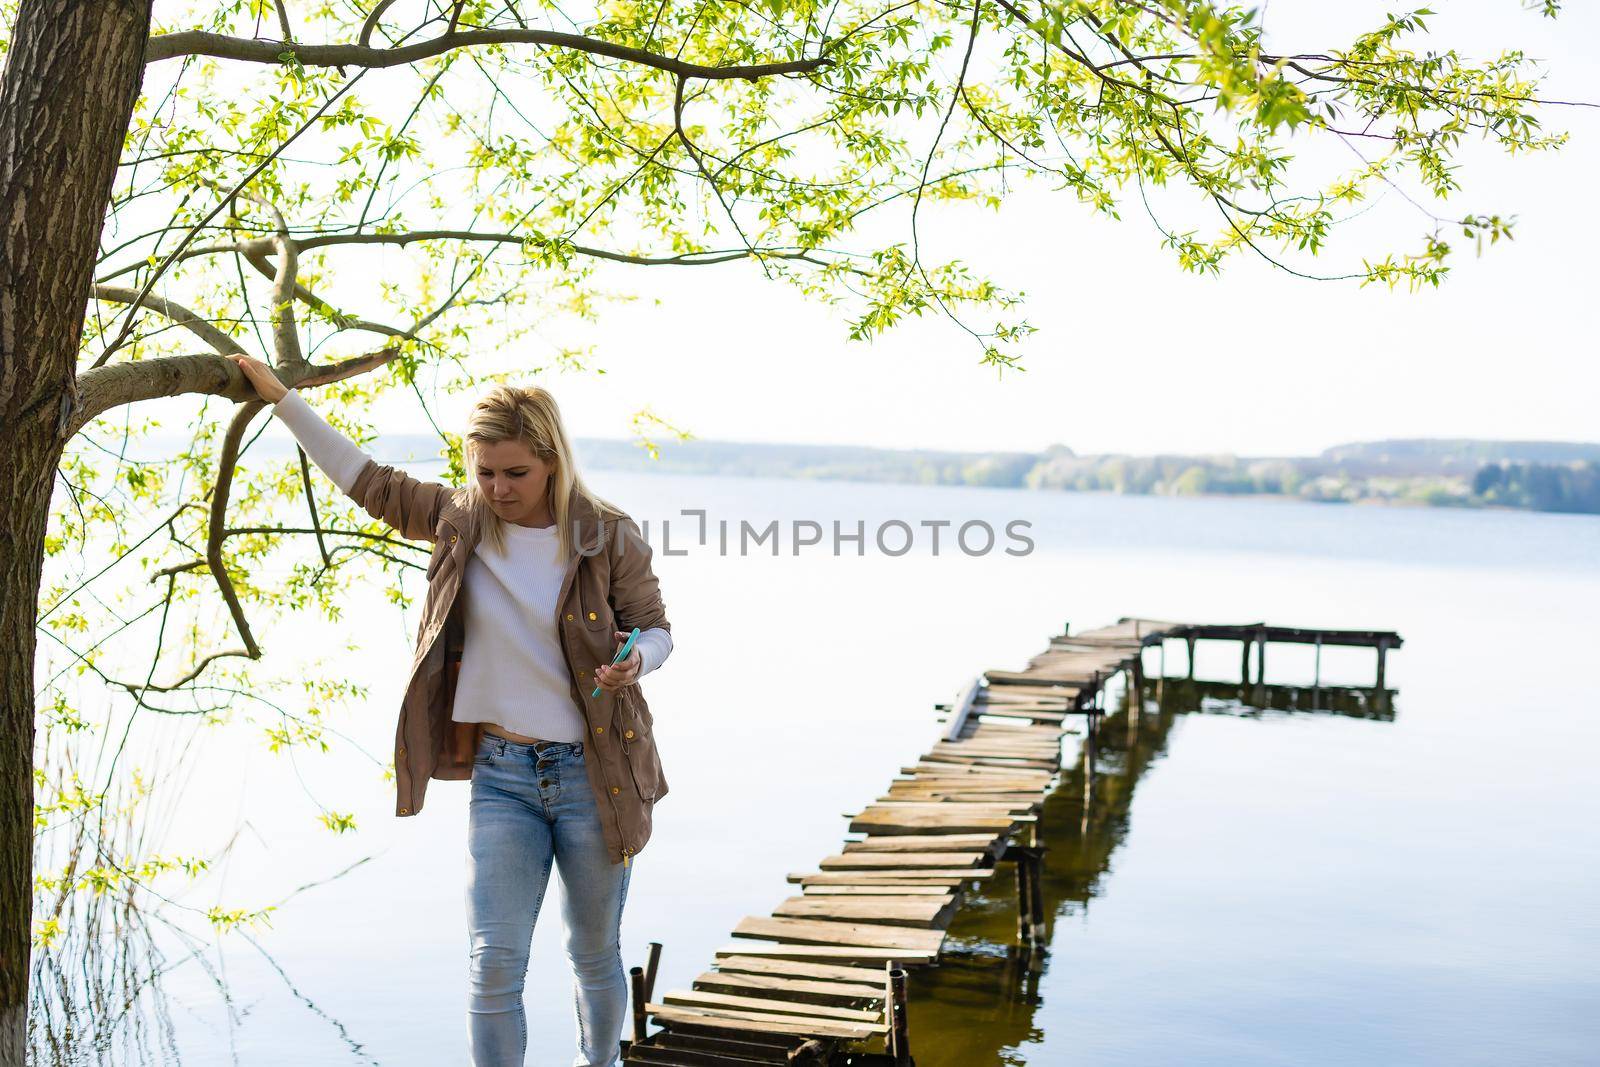 pier, wooden platform panton by the river. by Andelov13